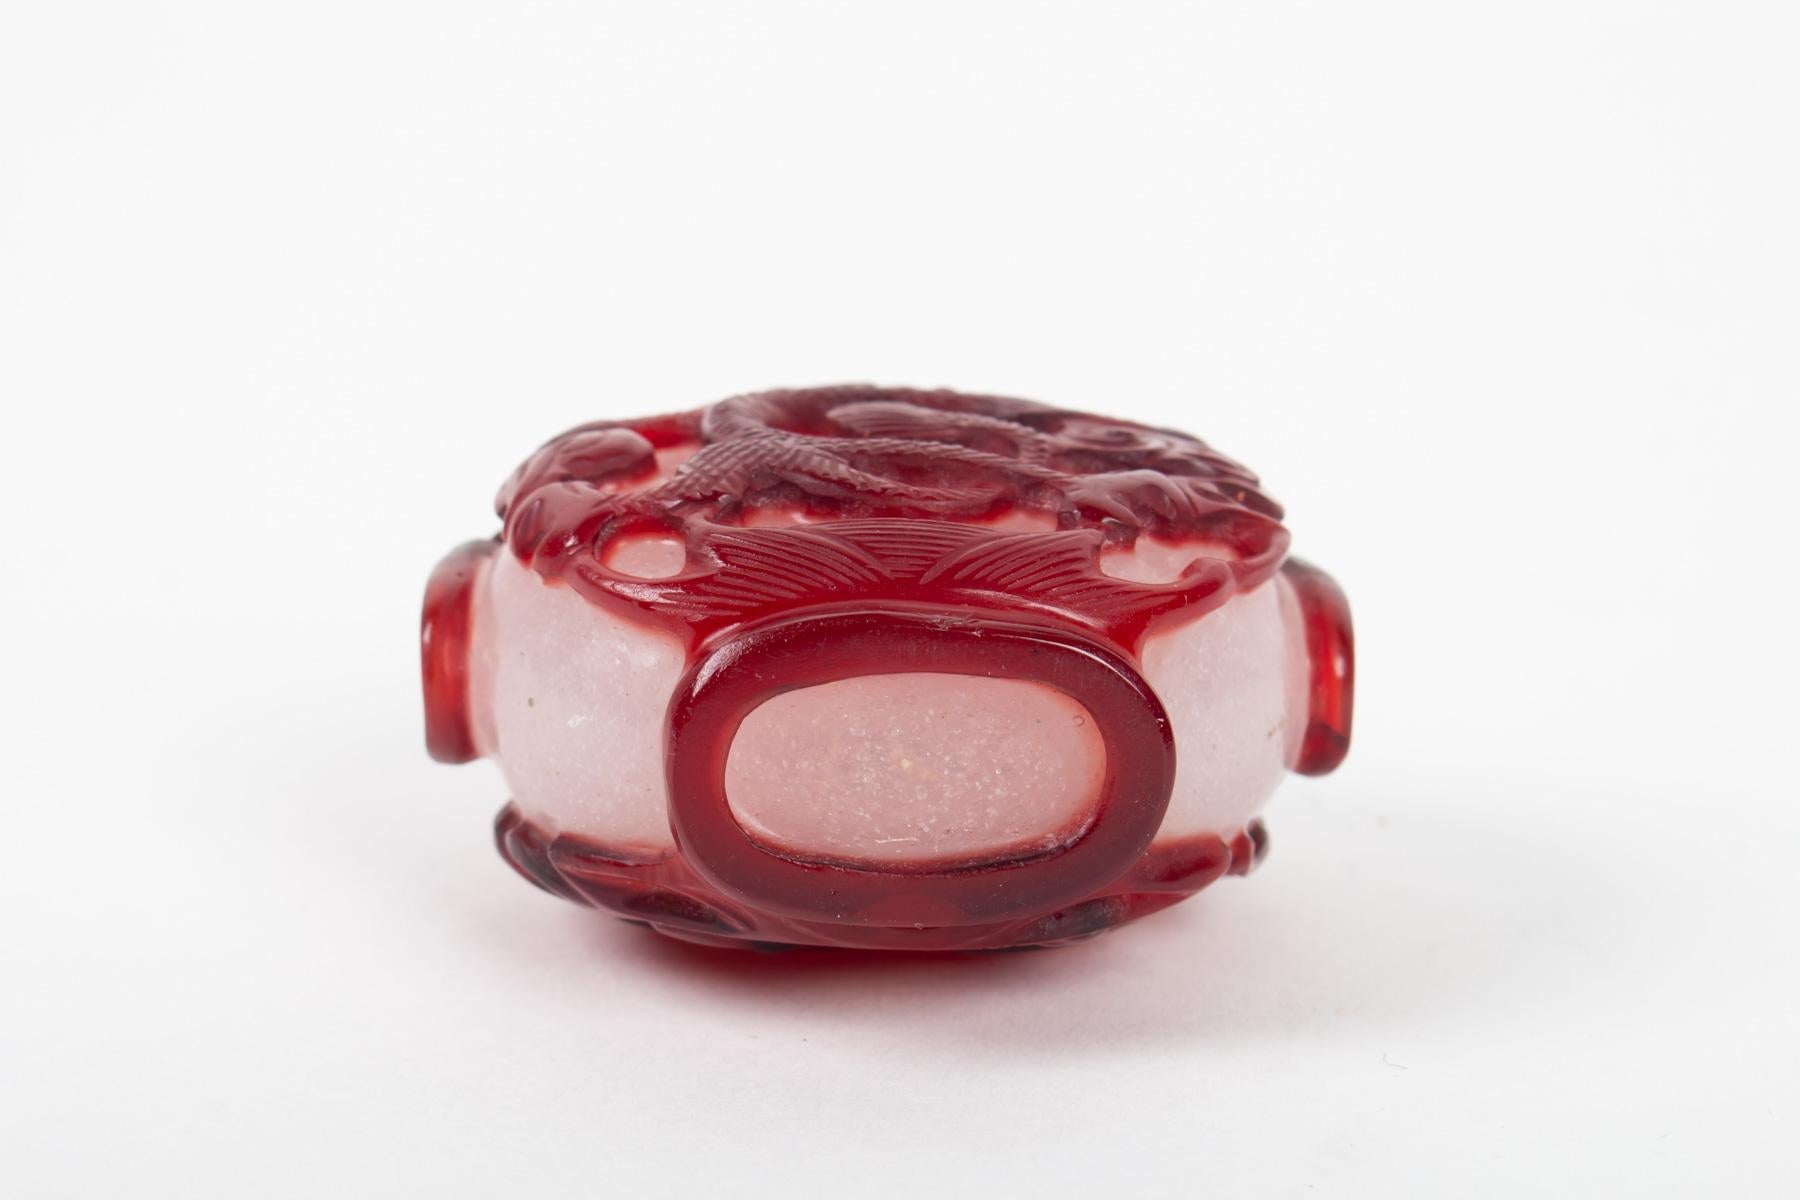 19th Century Glass Snuffbox Overlay White Opaque and Red Blood with Decoration of a Dragon